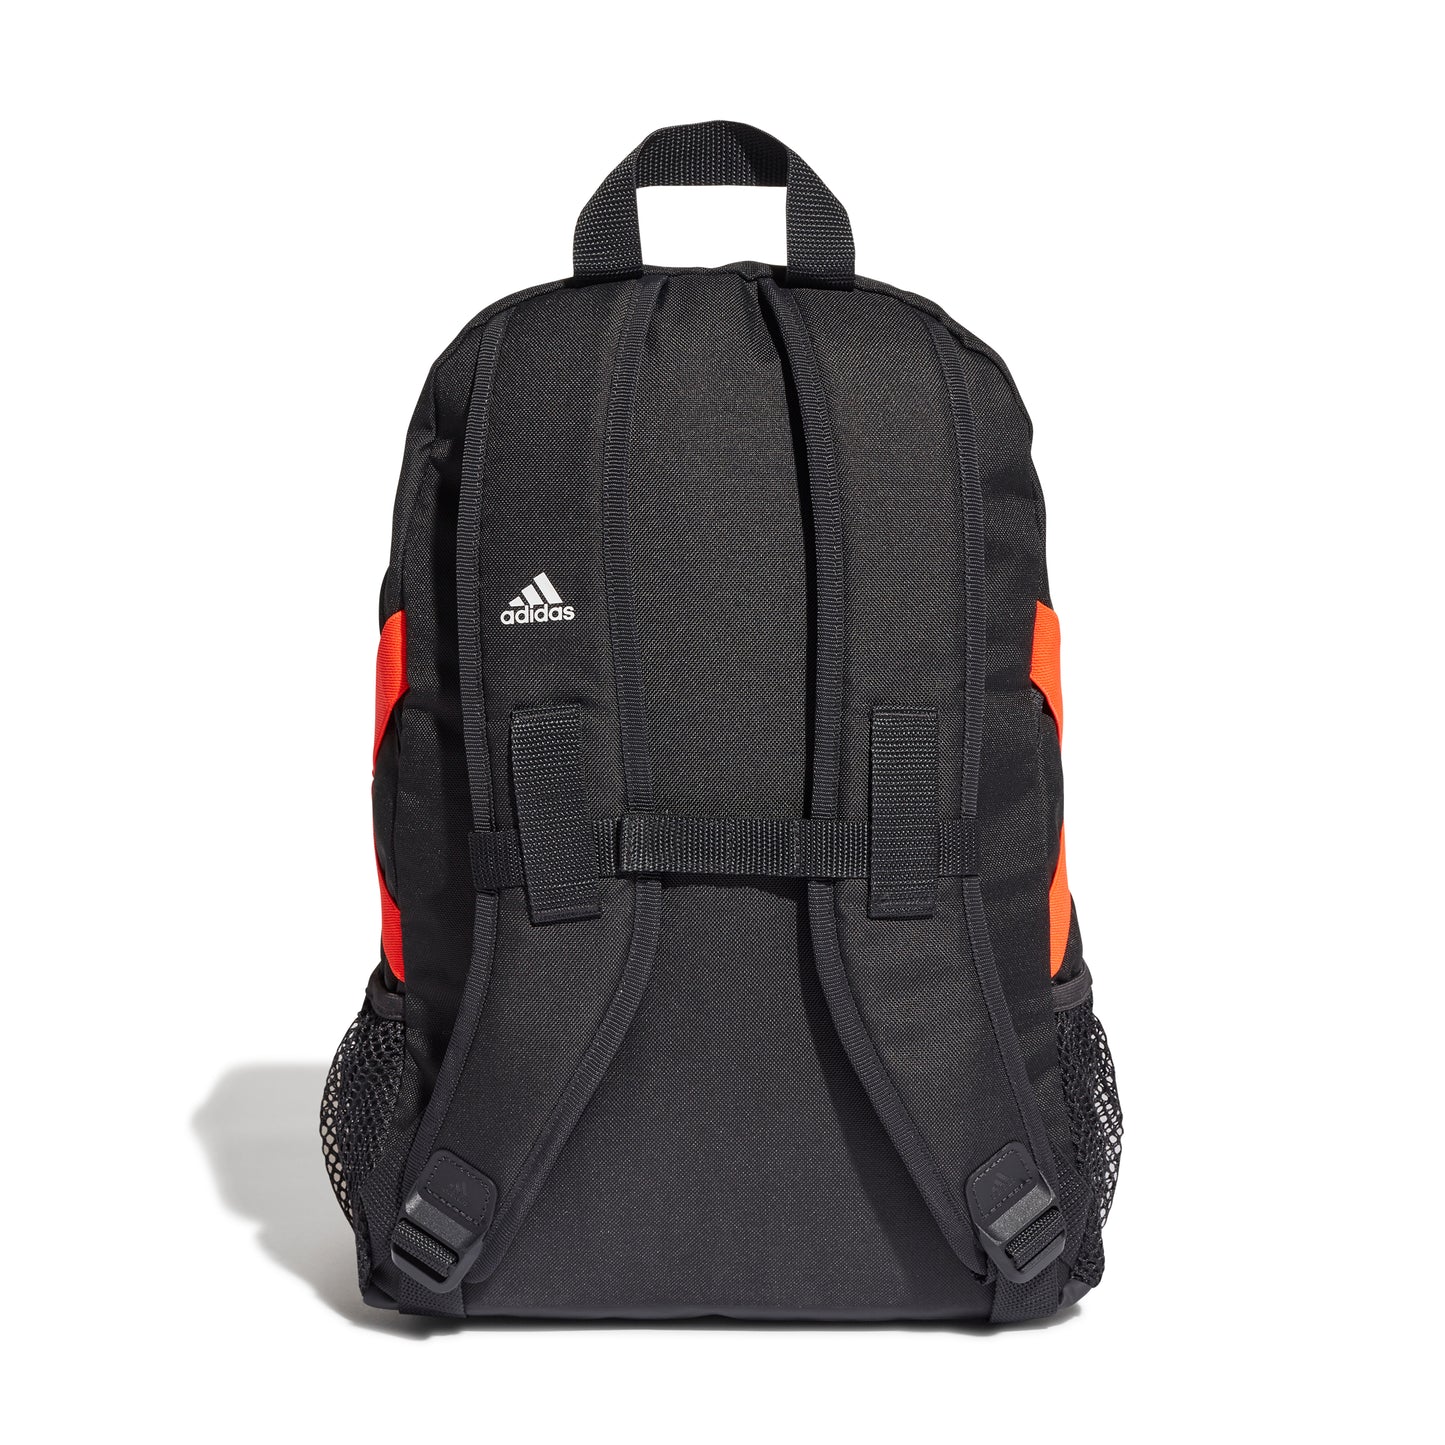 Adidas Power 5 Backpack Small